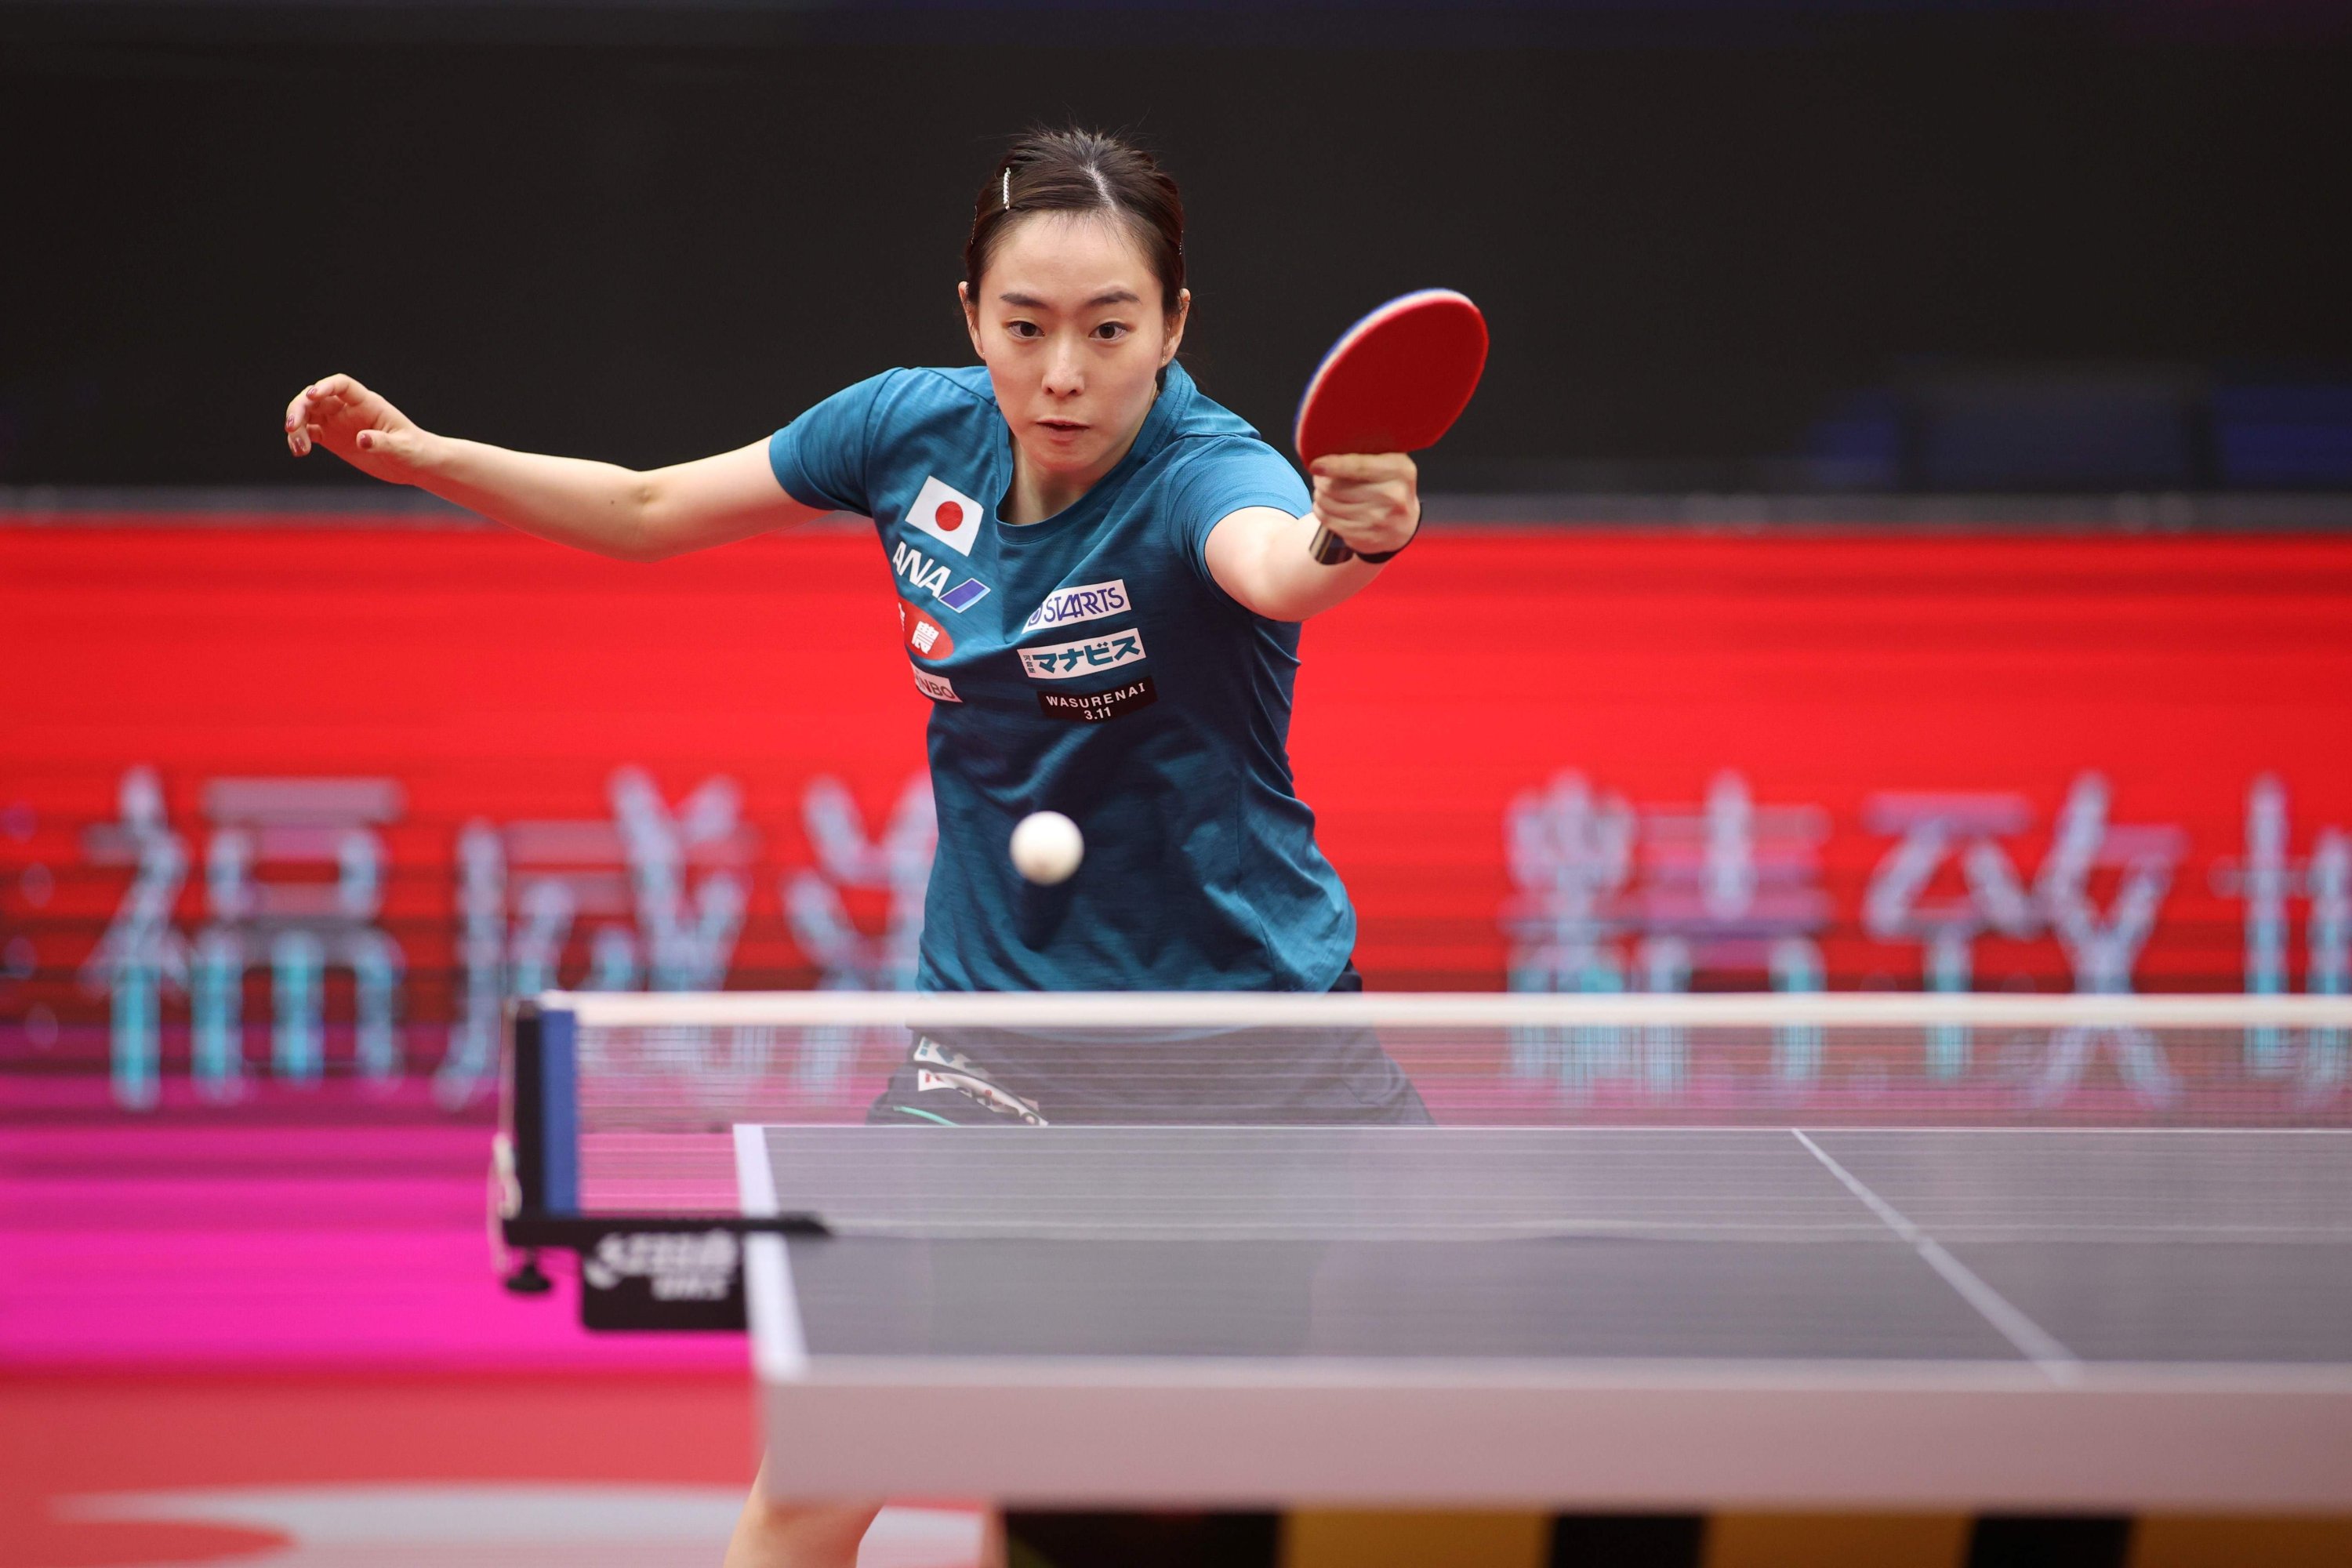 International table tennis returns after 8 months with Women's World Cup |  Daily Sabah